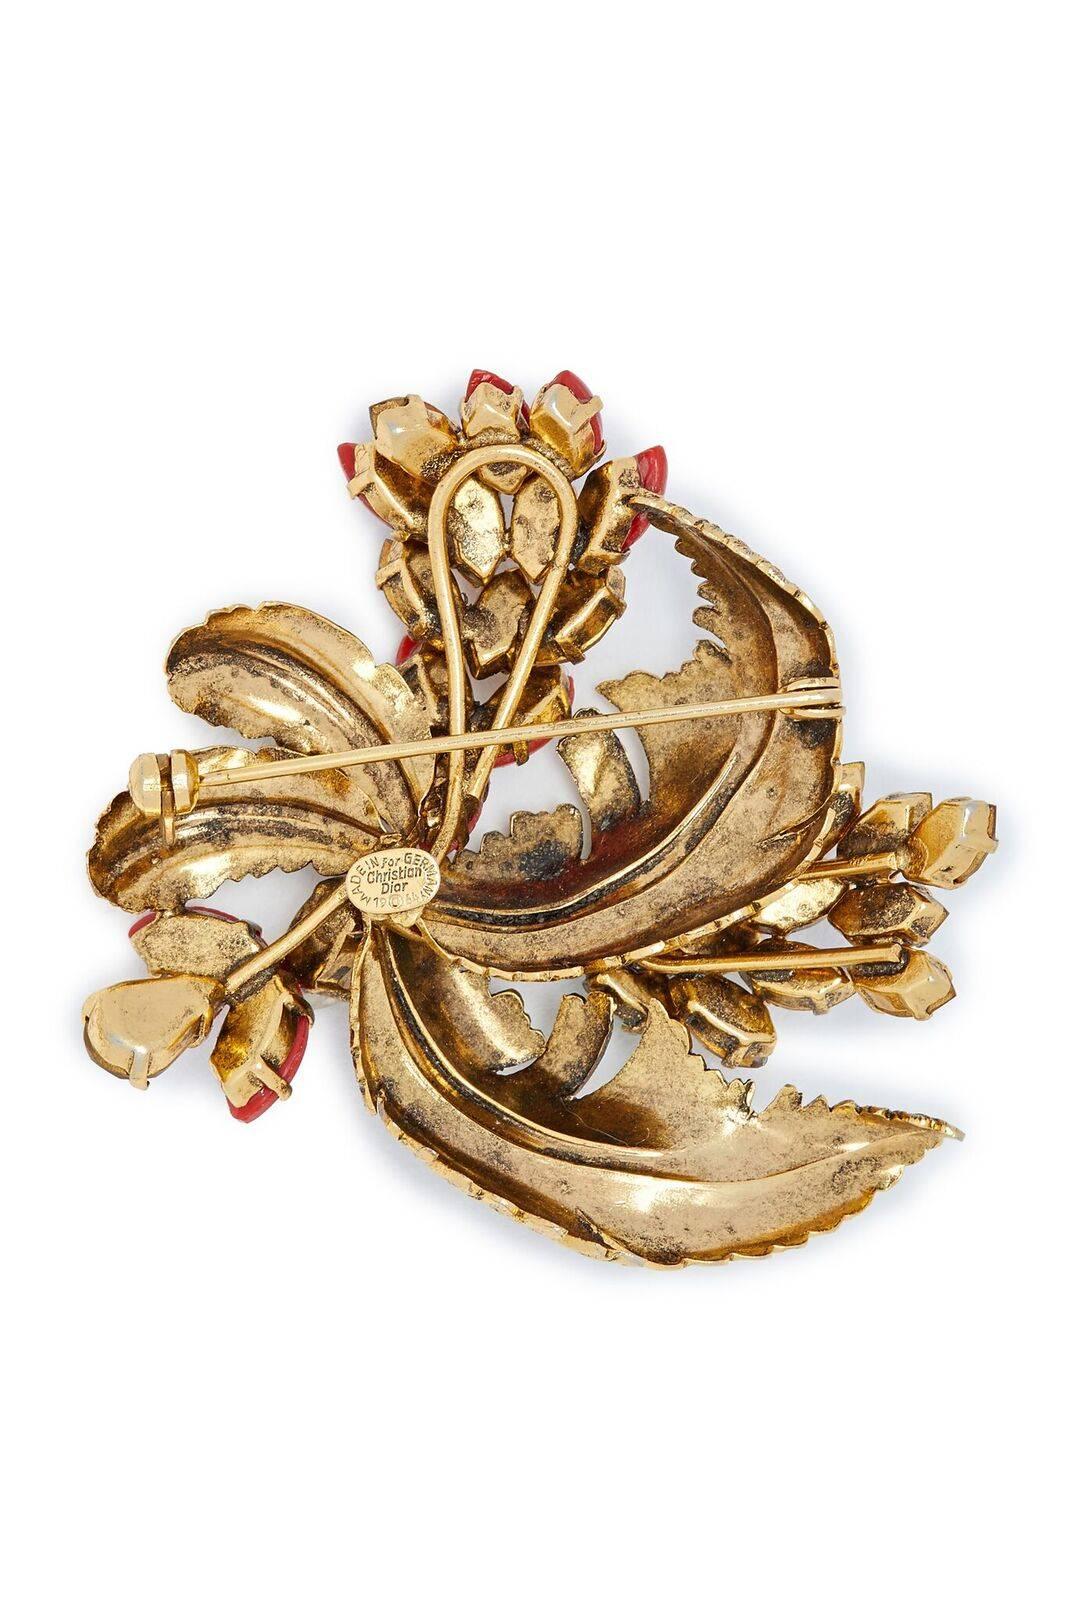 This desirable 1964 Christian Dior feather spray design brooch in burnished gold-tone metal is a timeless piece in excellent condition. Prong set navette cut faux gemstones in burnt orange, jade green, milk opal and brown topaz are artfully arranged